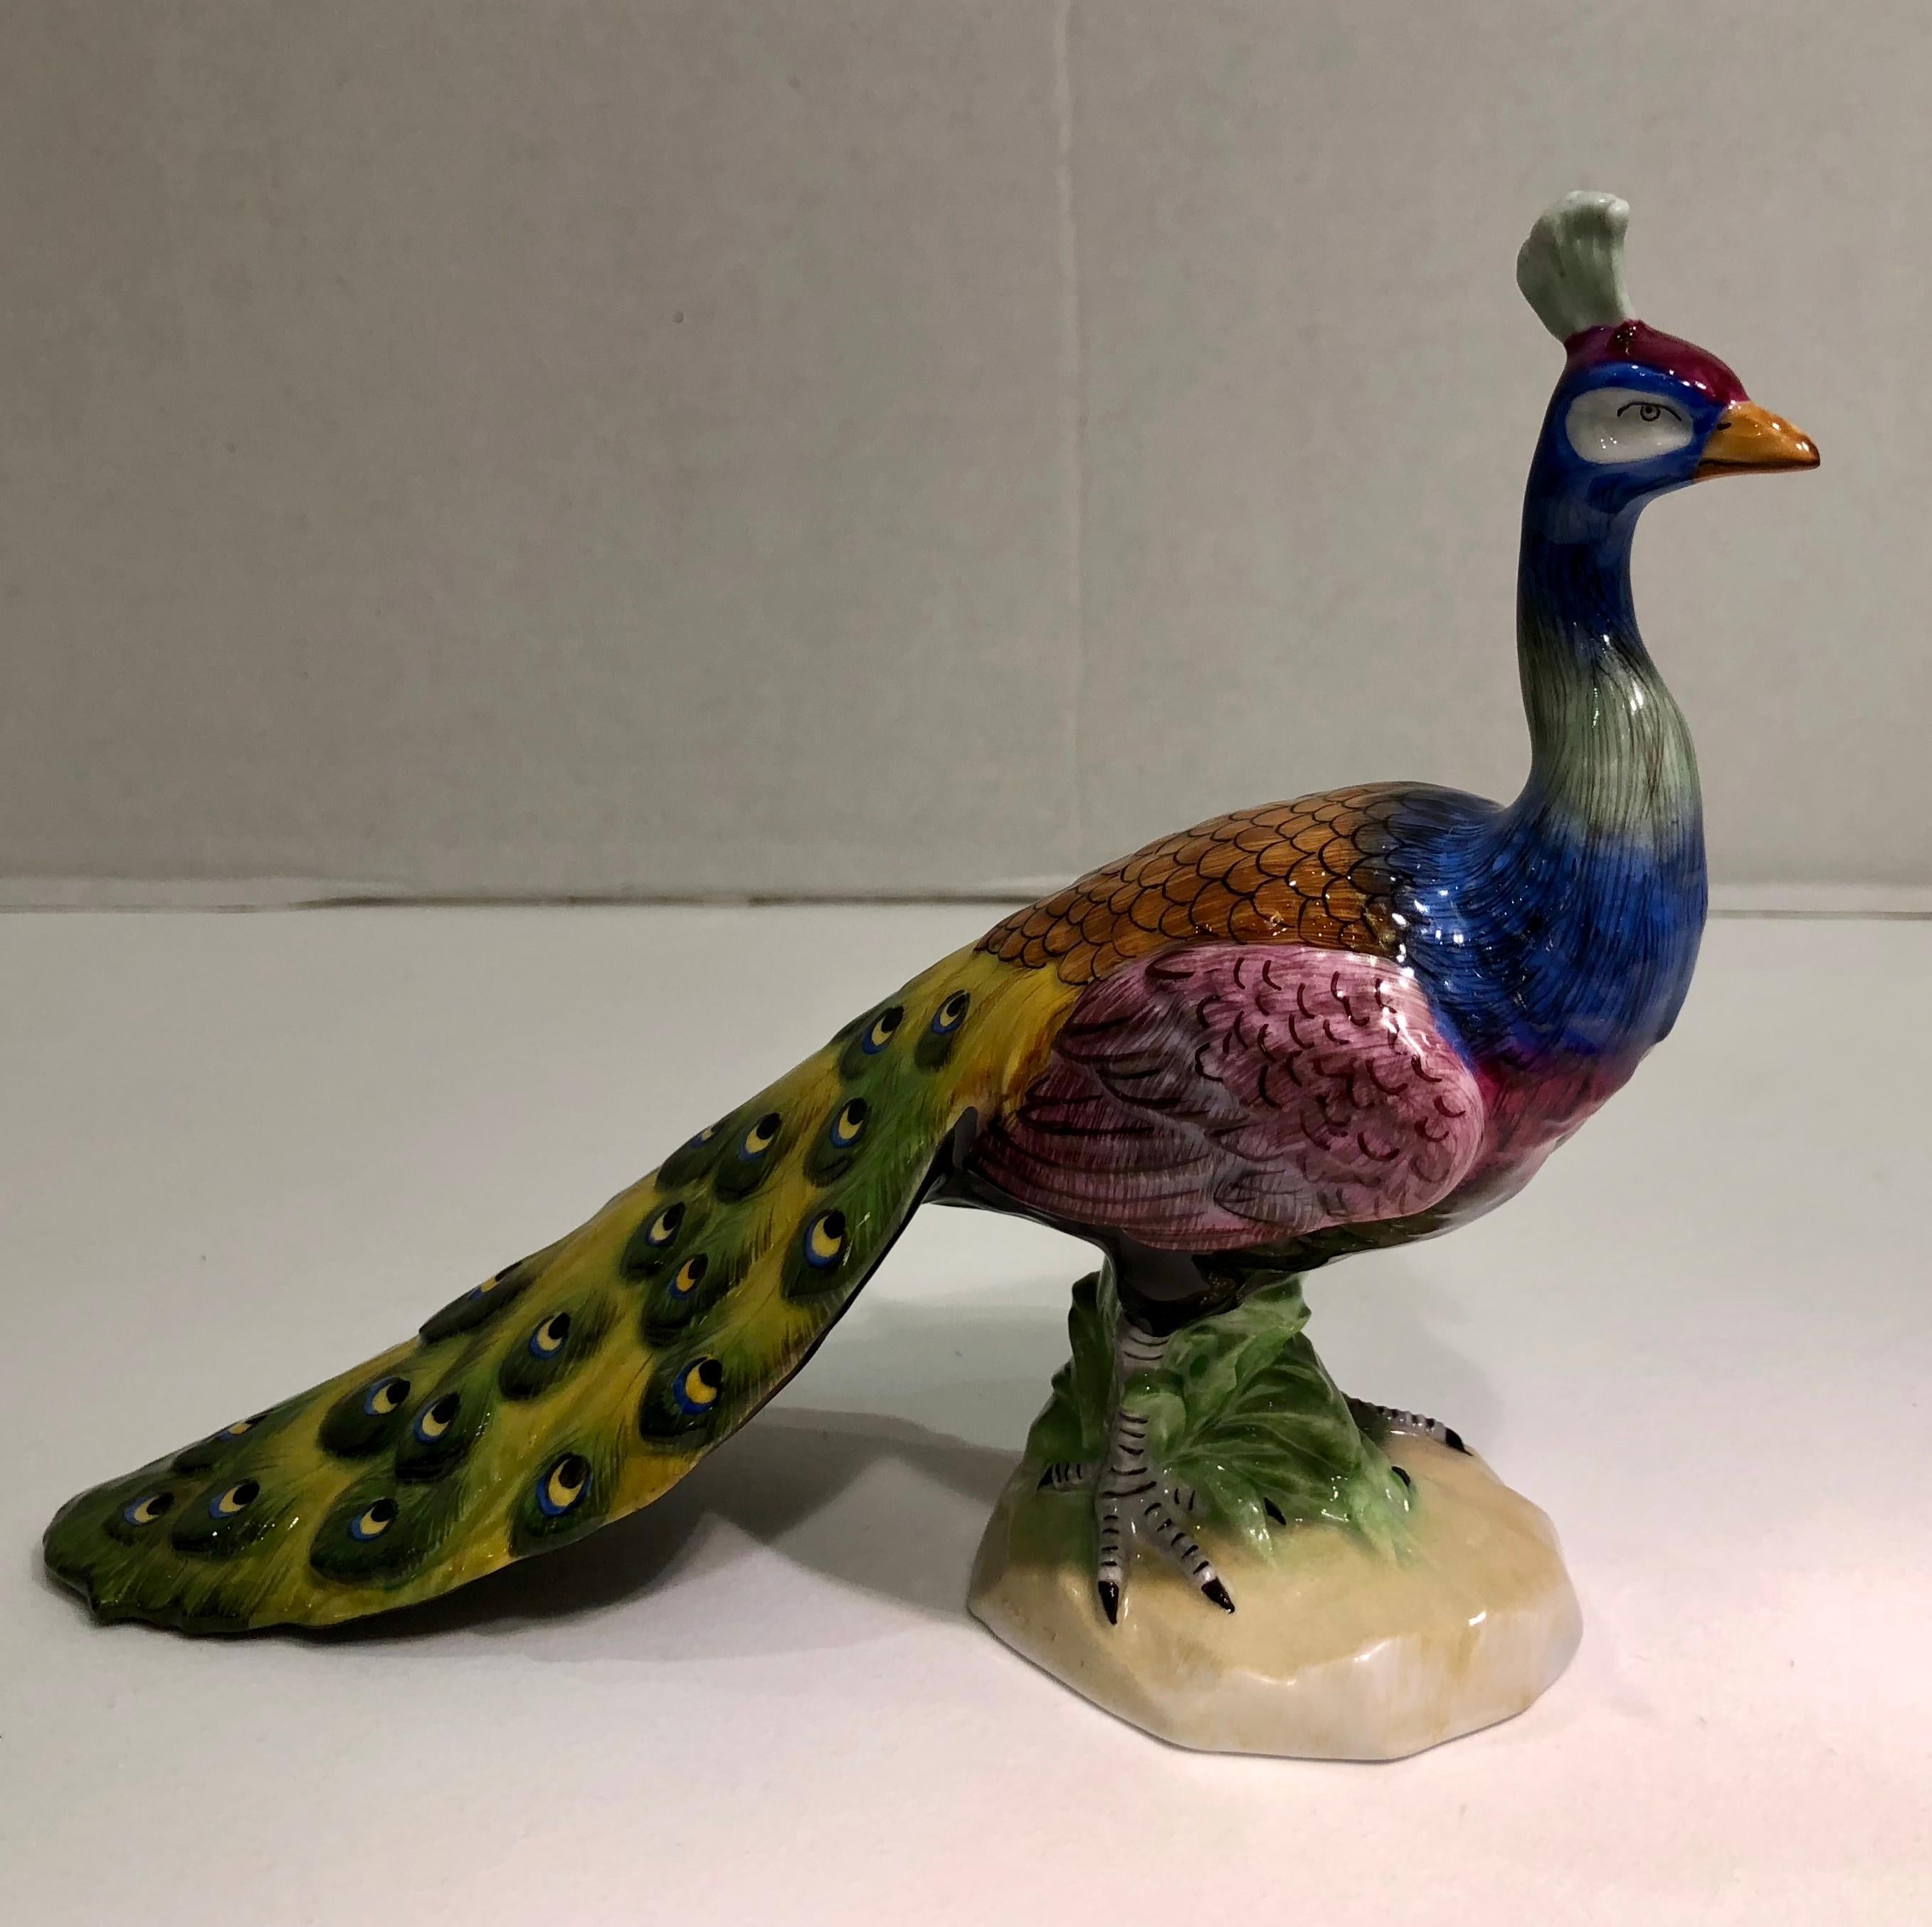 Exquisite Dresden Porcelain Peacock Tail Closed Facing Forward Figurine Germany In Excellent Condition For Sale In Tustin, CA